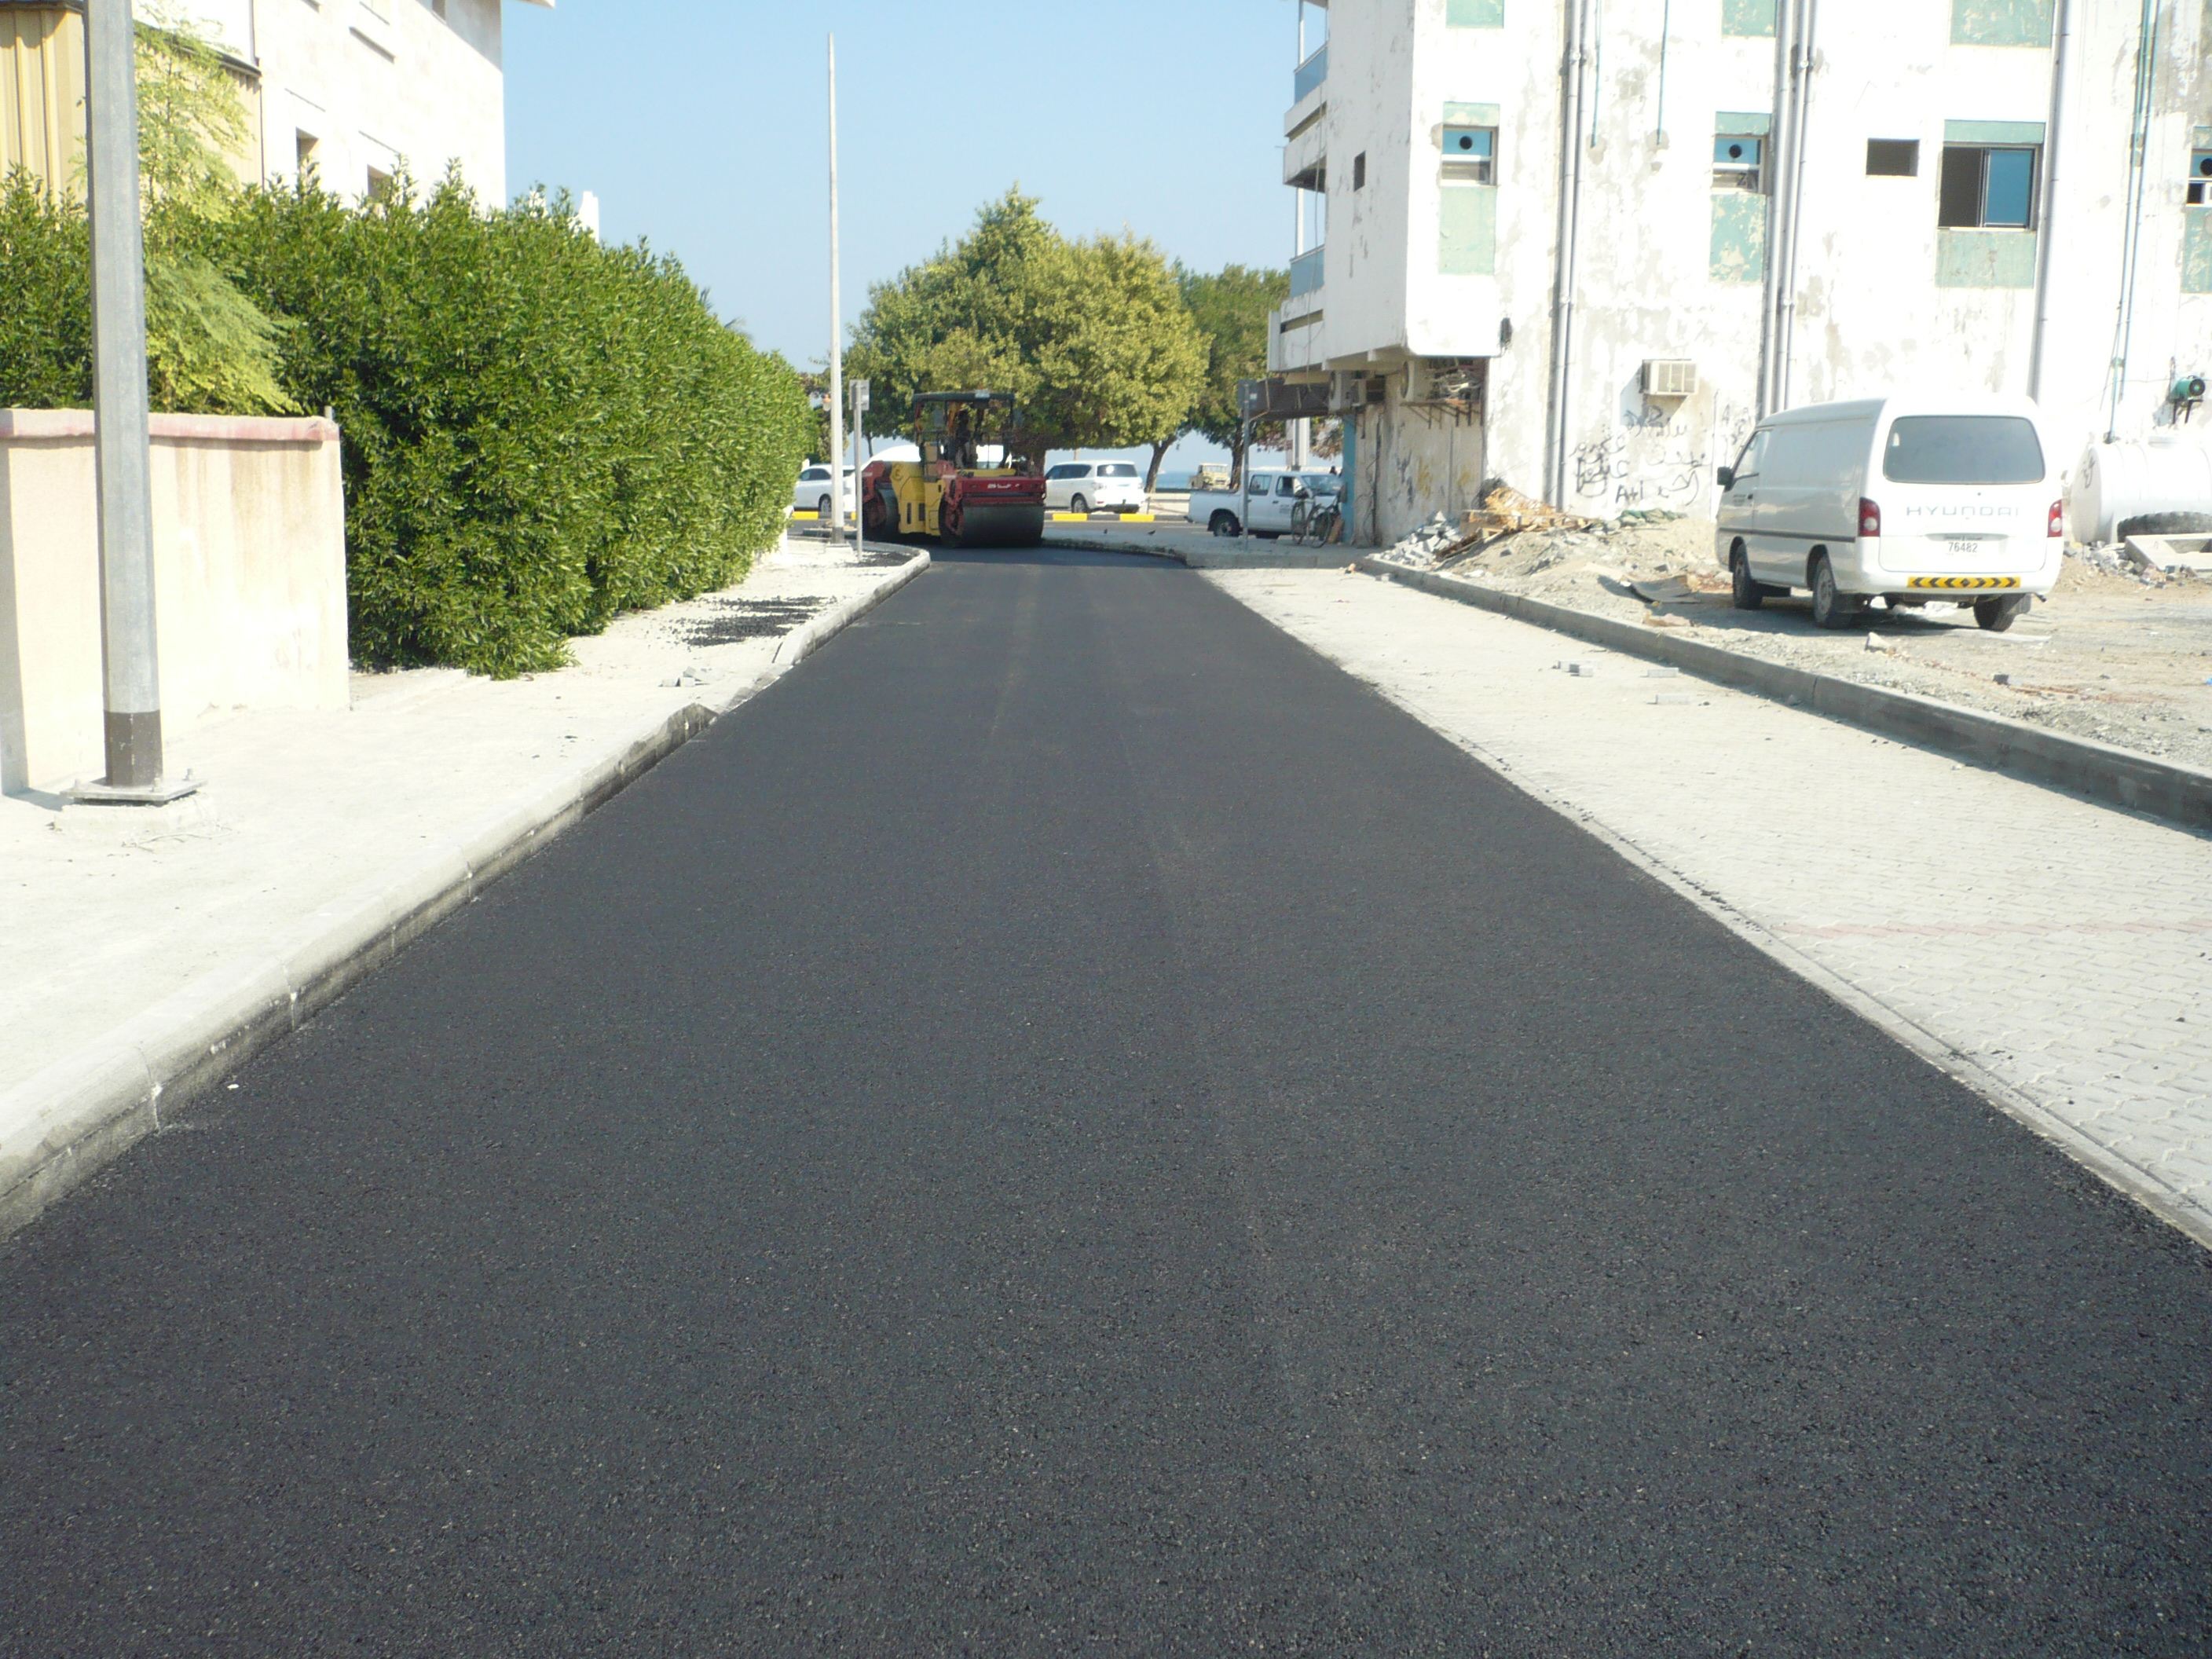 NCTC is awarded a Project Cont. R 1052 – Arjan Second Access Road by Government of Dubai, Roads and Transport Authority, Dubai